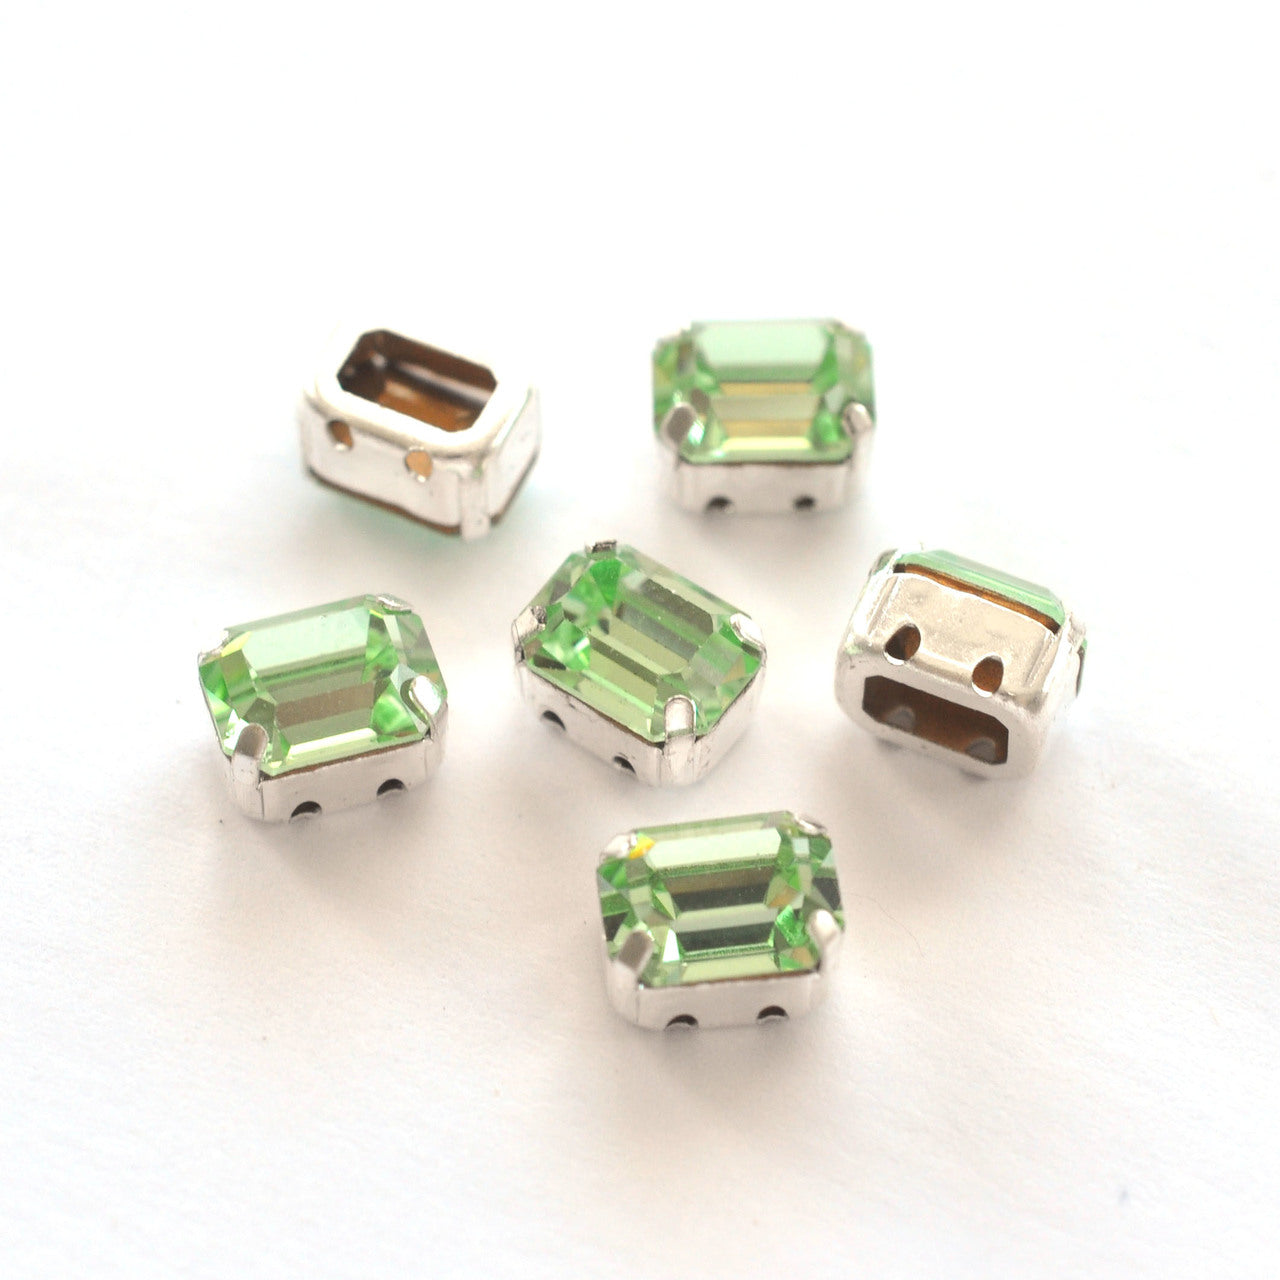 Chrysolite 8x6mm Octagon Sew On Crystals - 6 Pieces